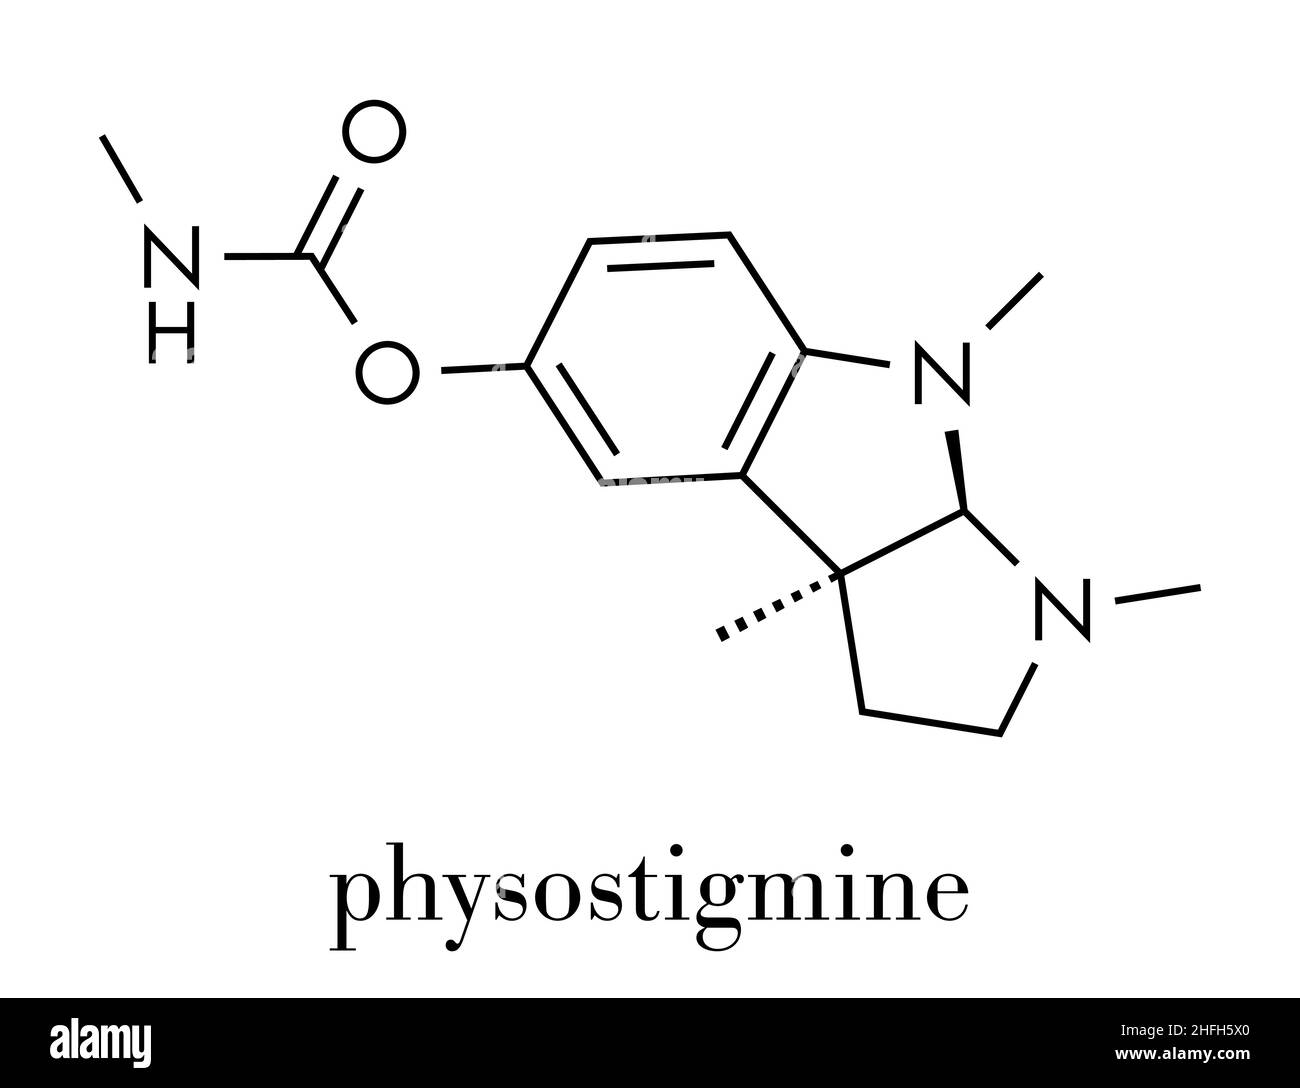 Physostigmine alkaloid molecule. Present in calabar bean and manchineel tree, acts as acetylcholinesterase inhibitor. Skeletal formula. Stock Vector